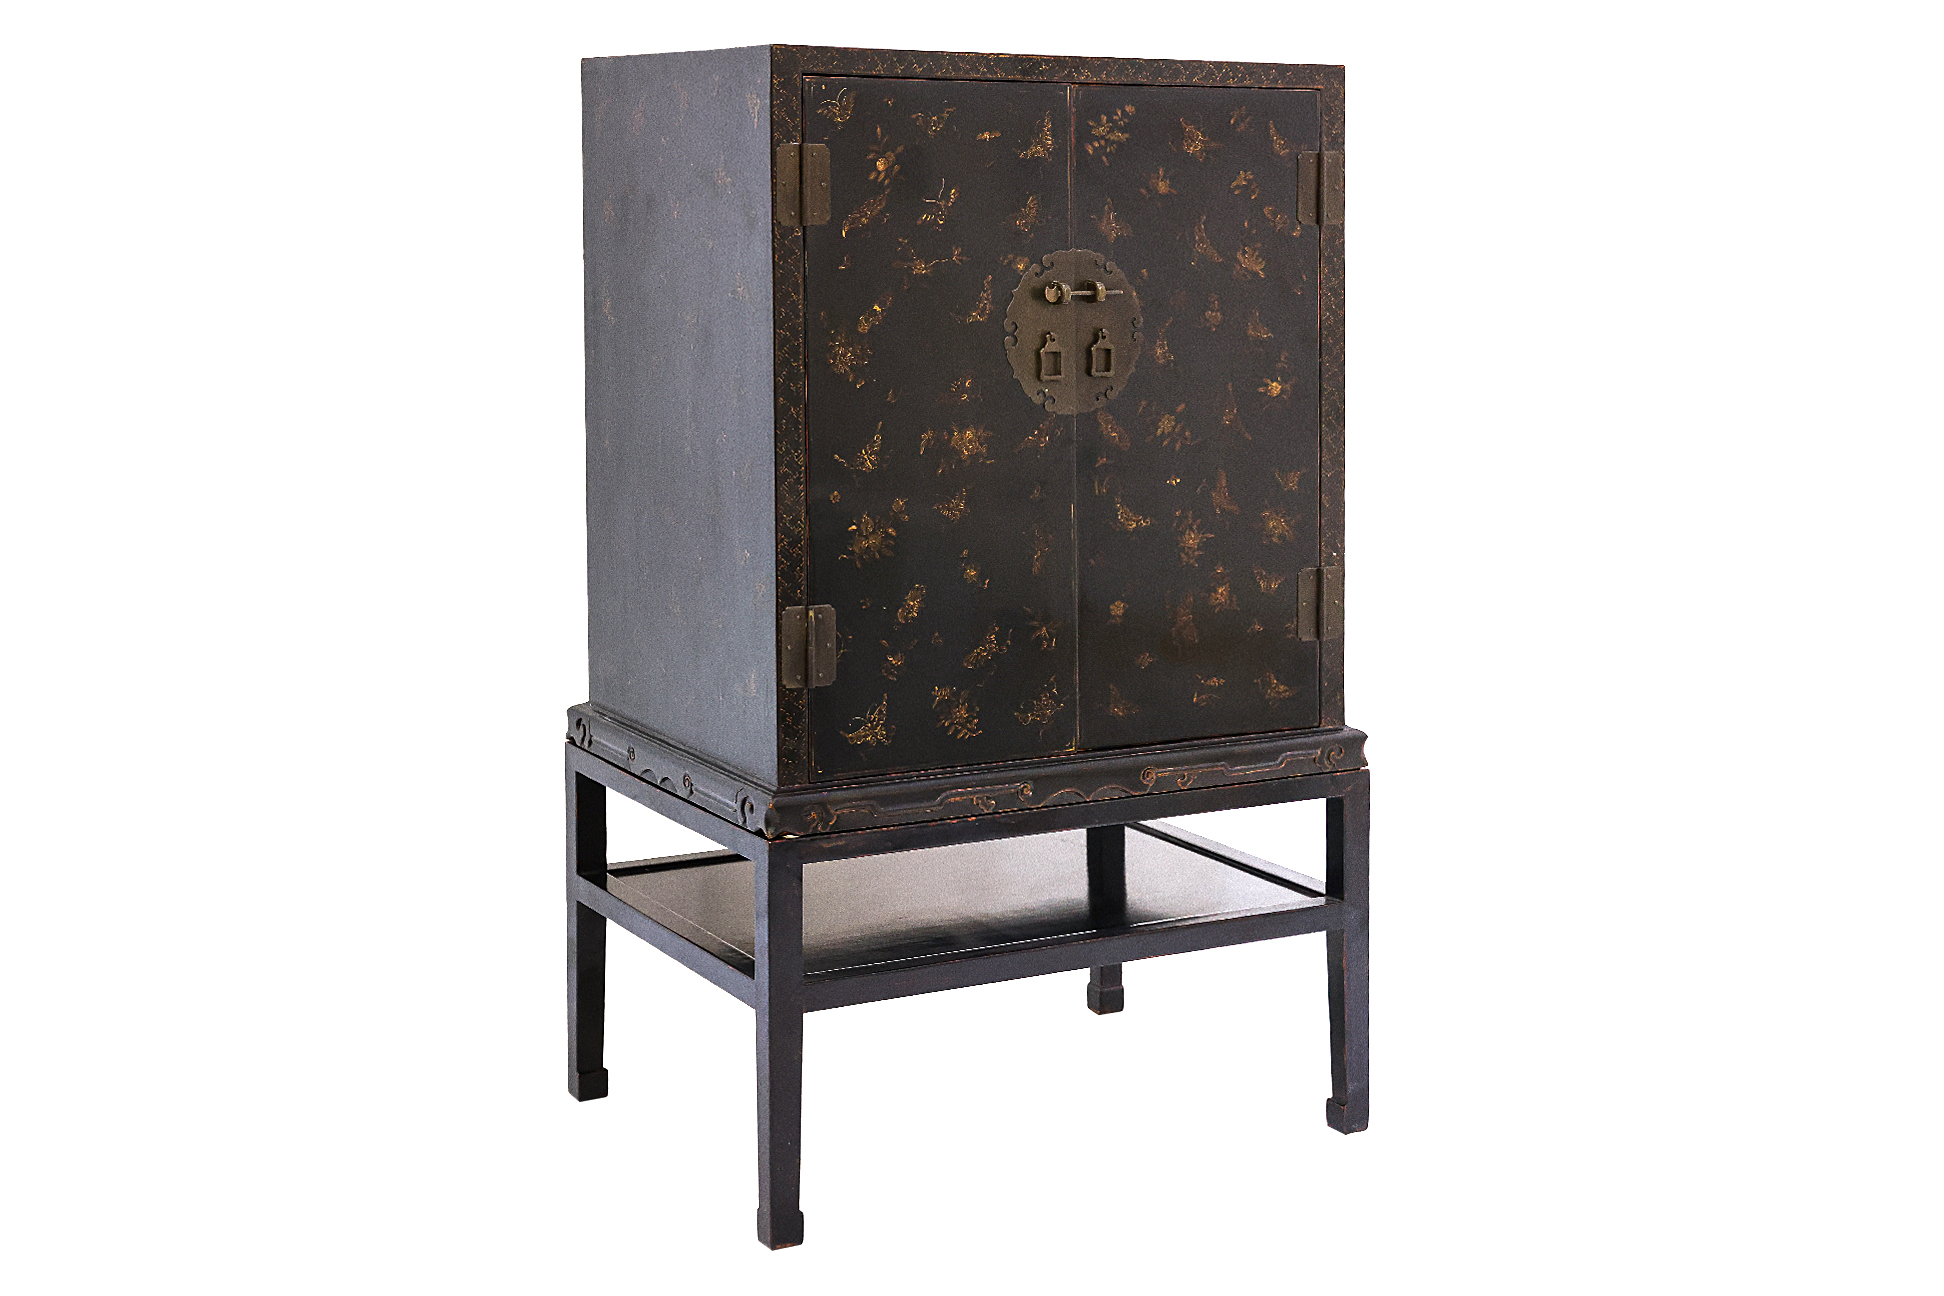 A LACQUERED BUTTERFLY CABINET ON STAND